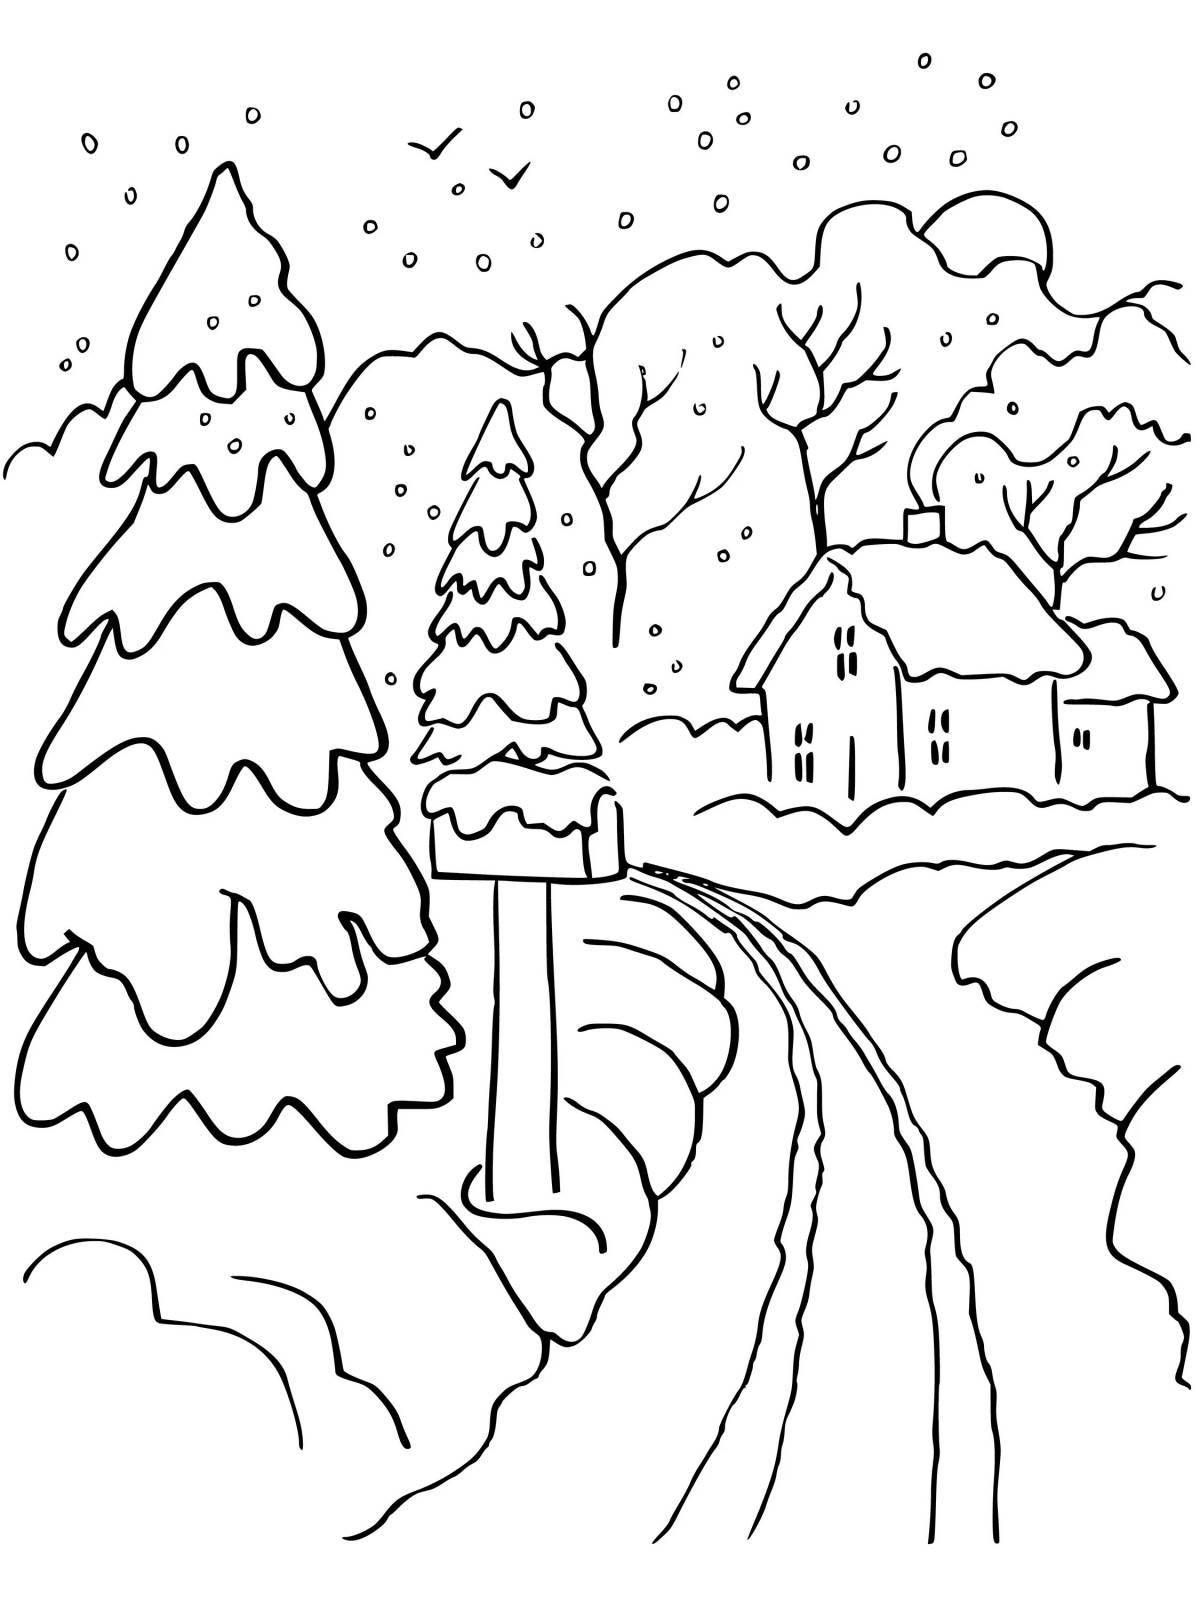 Coloring page captivating winter evening